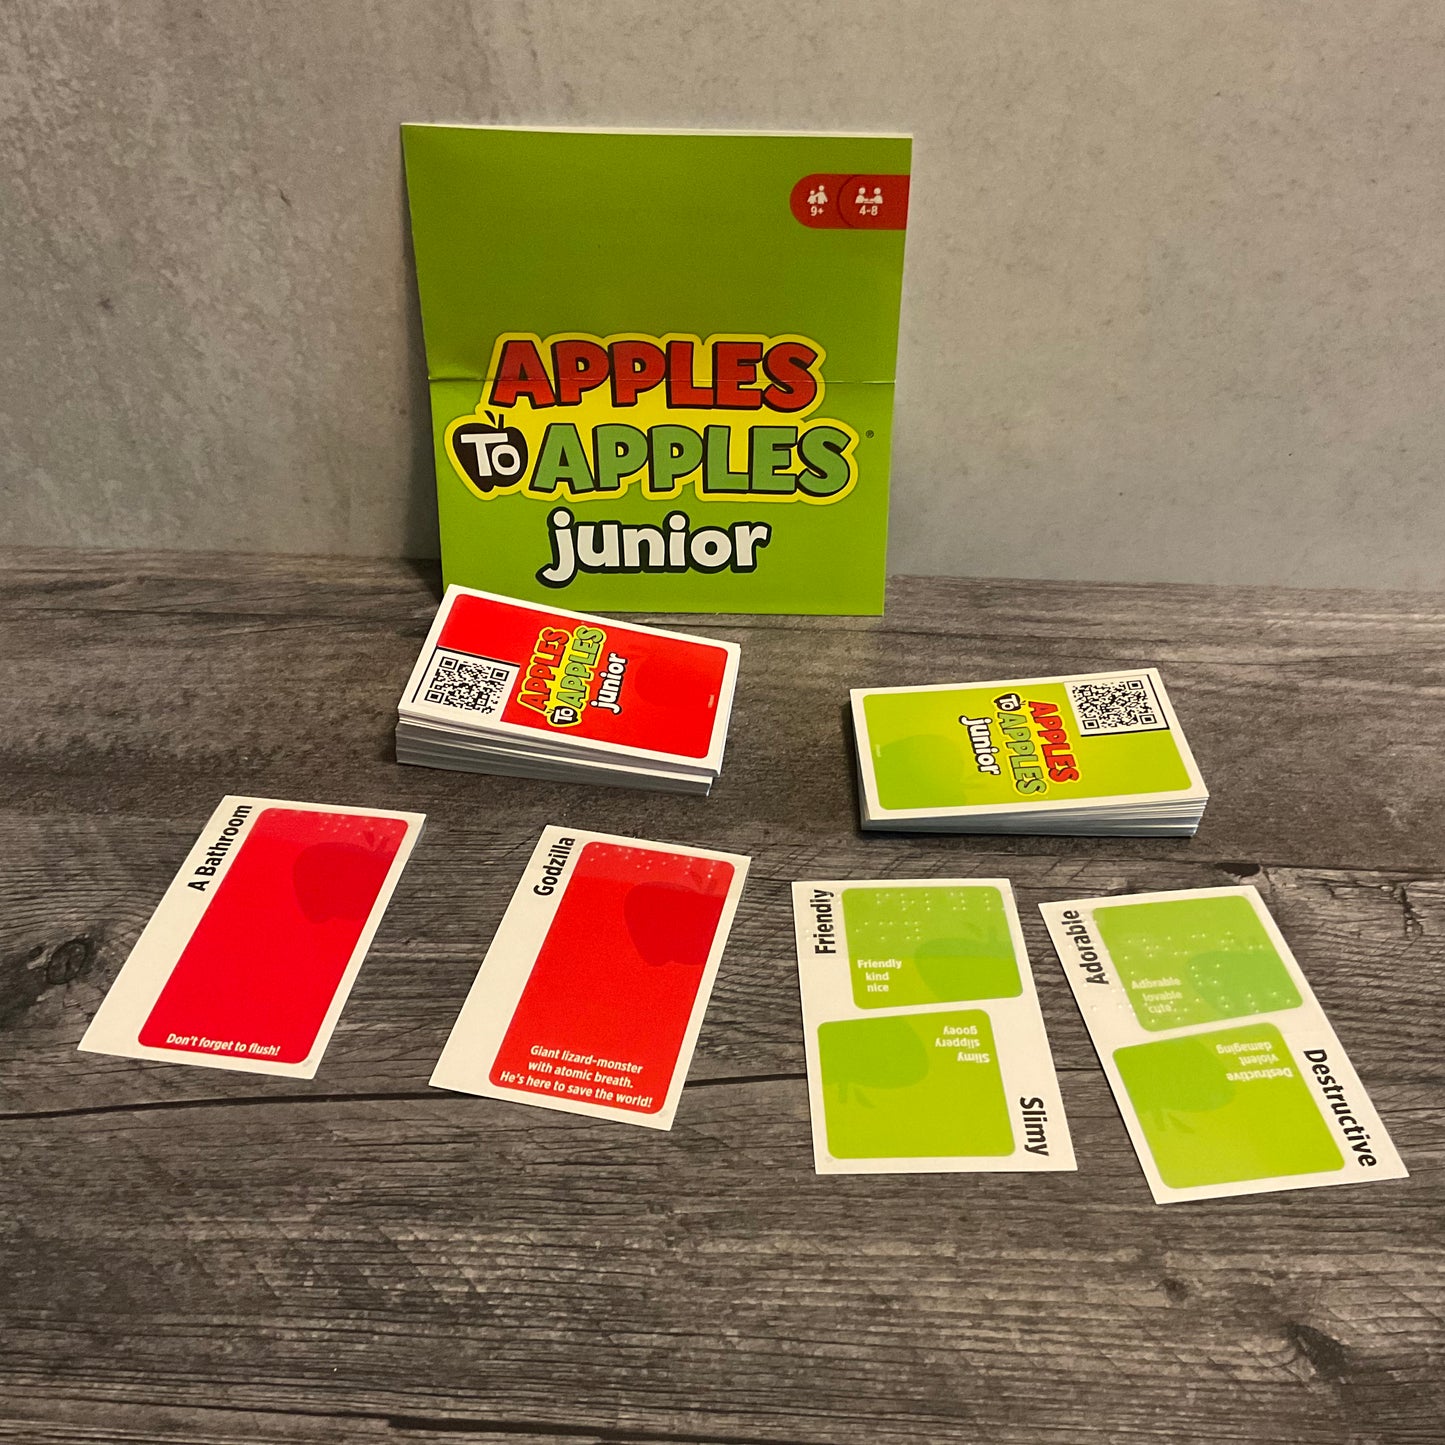 Apples to apple cards with QR code stickers on the back. The QR codes lead to the full text of the cards.